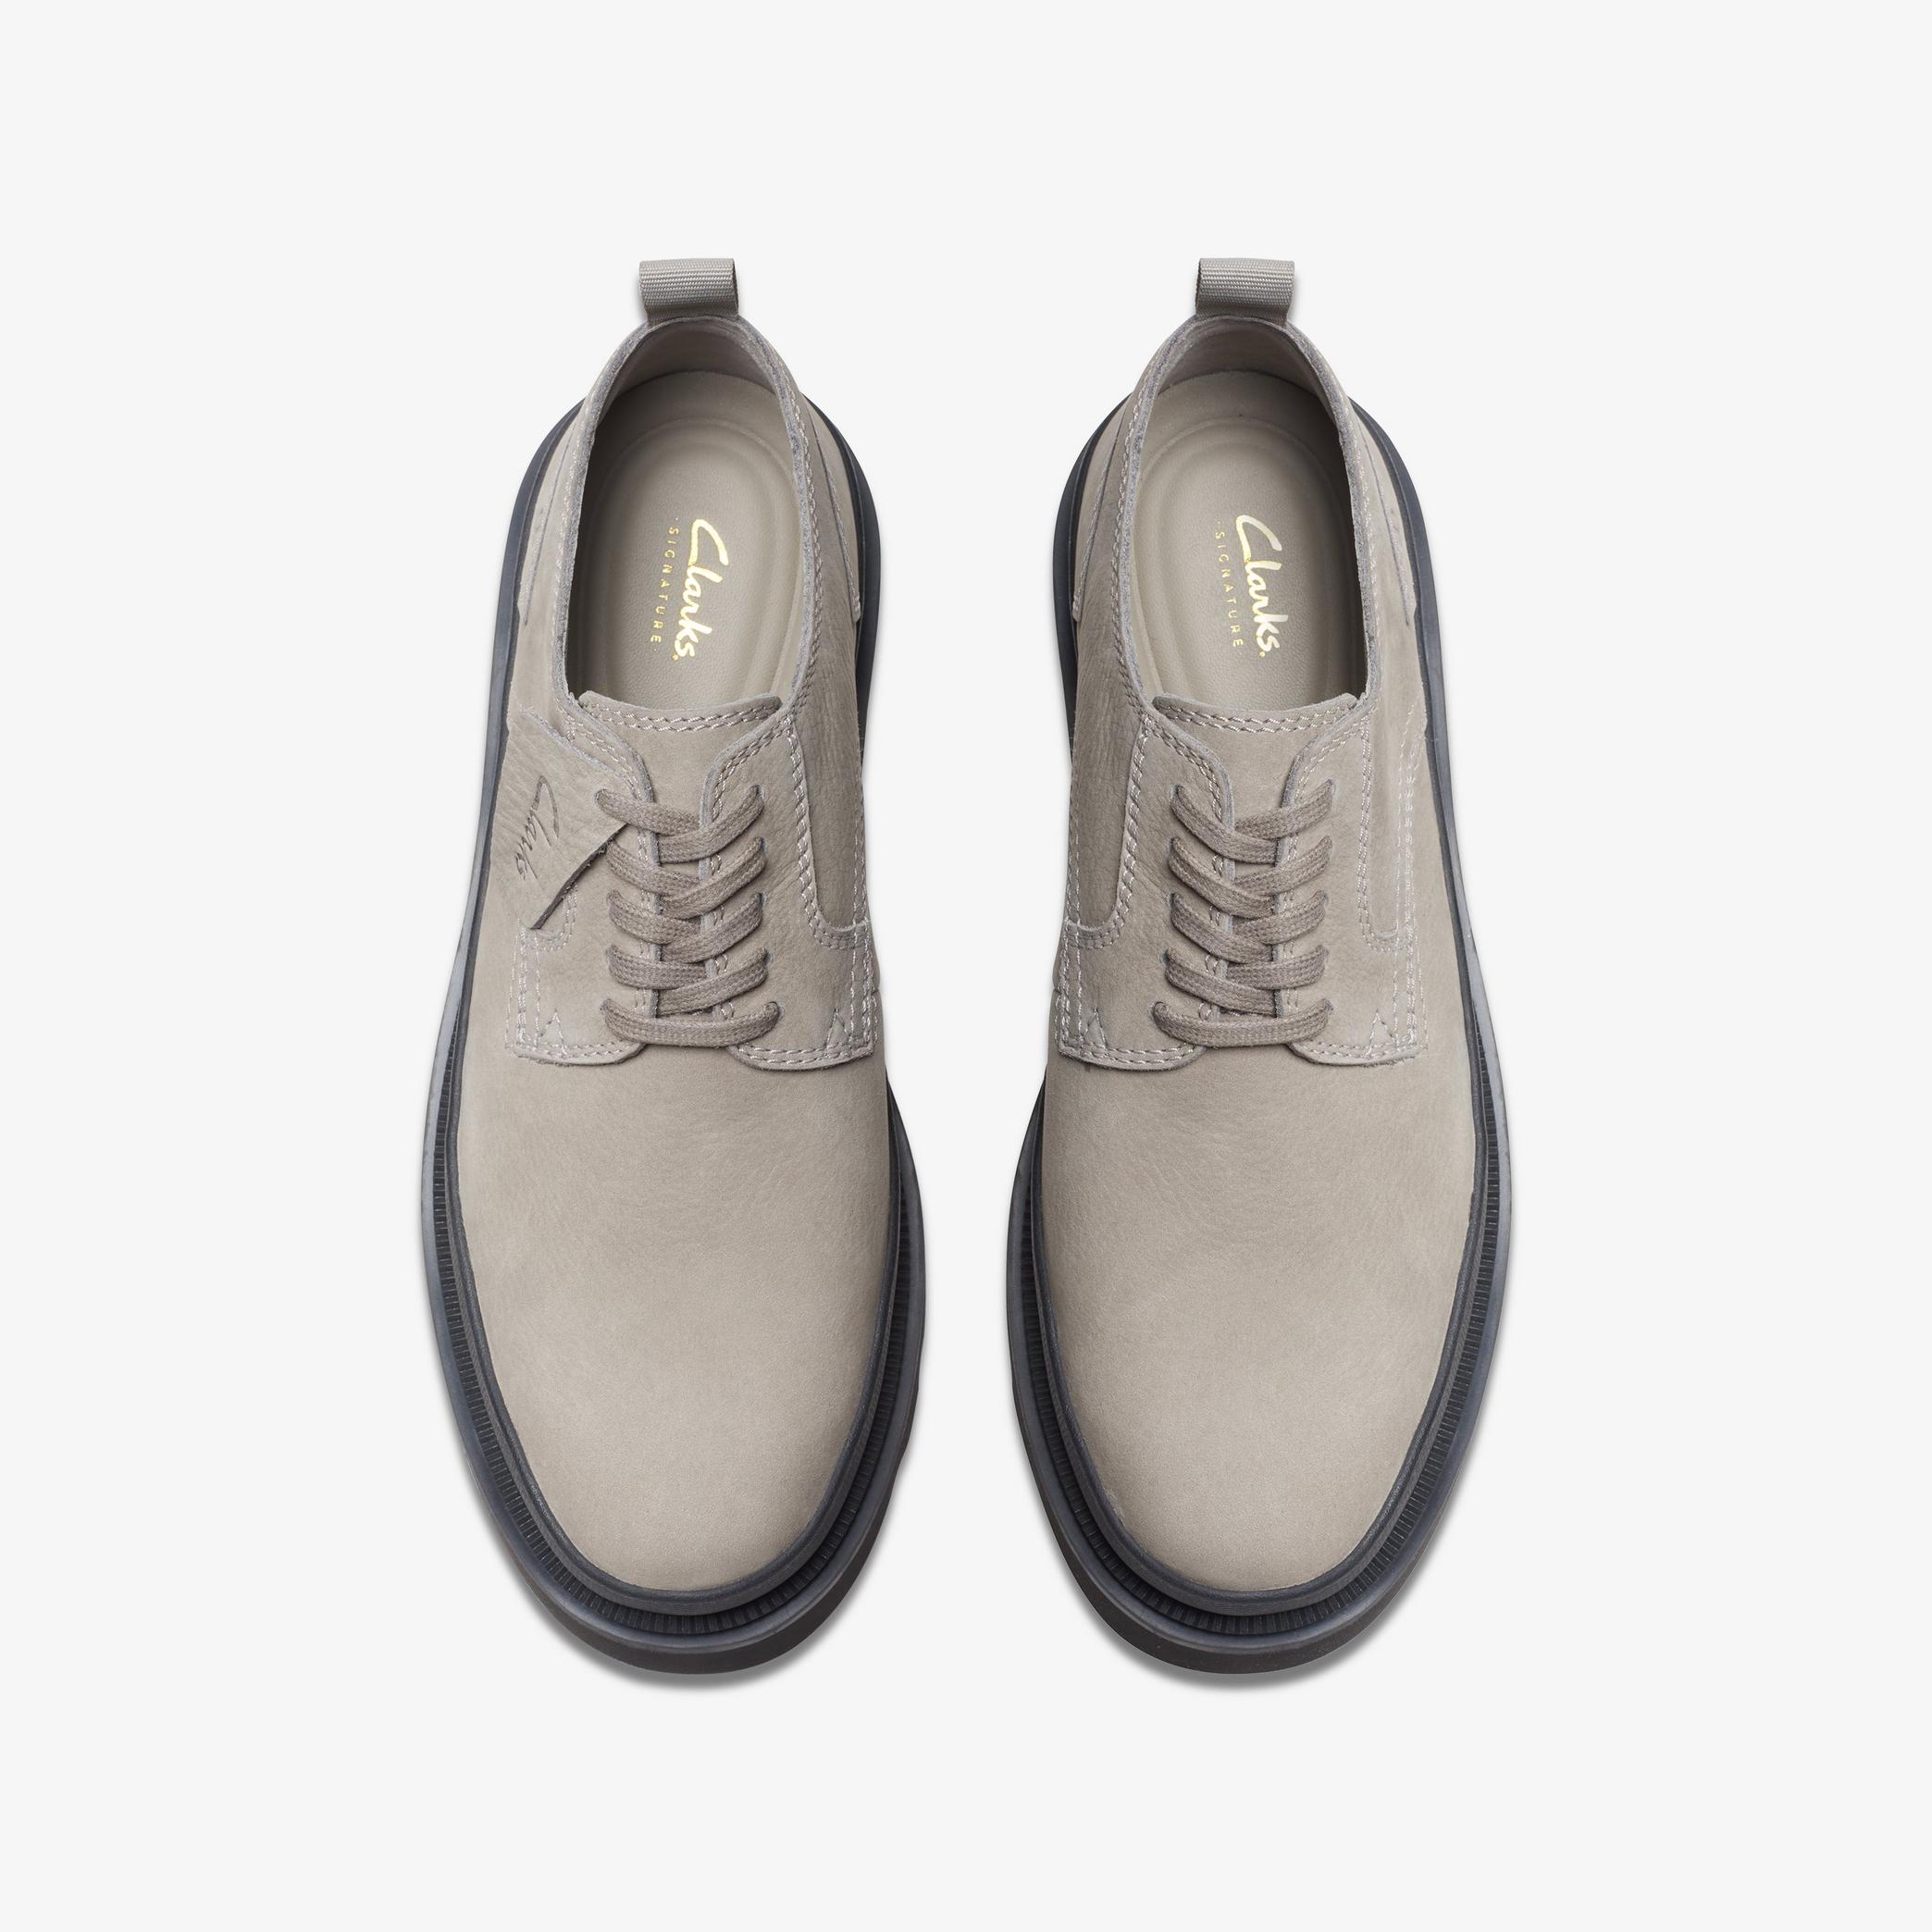 Badell Lace Grey Nubuck Oxford Shoes, view 6 of 6